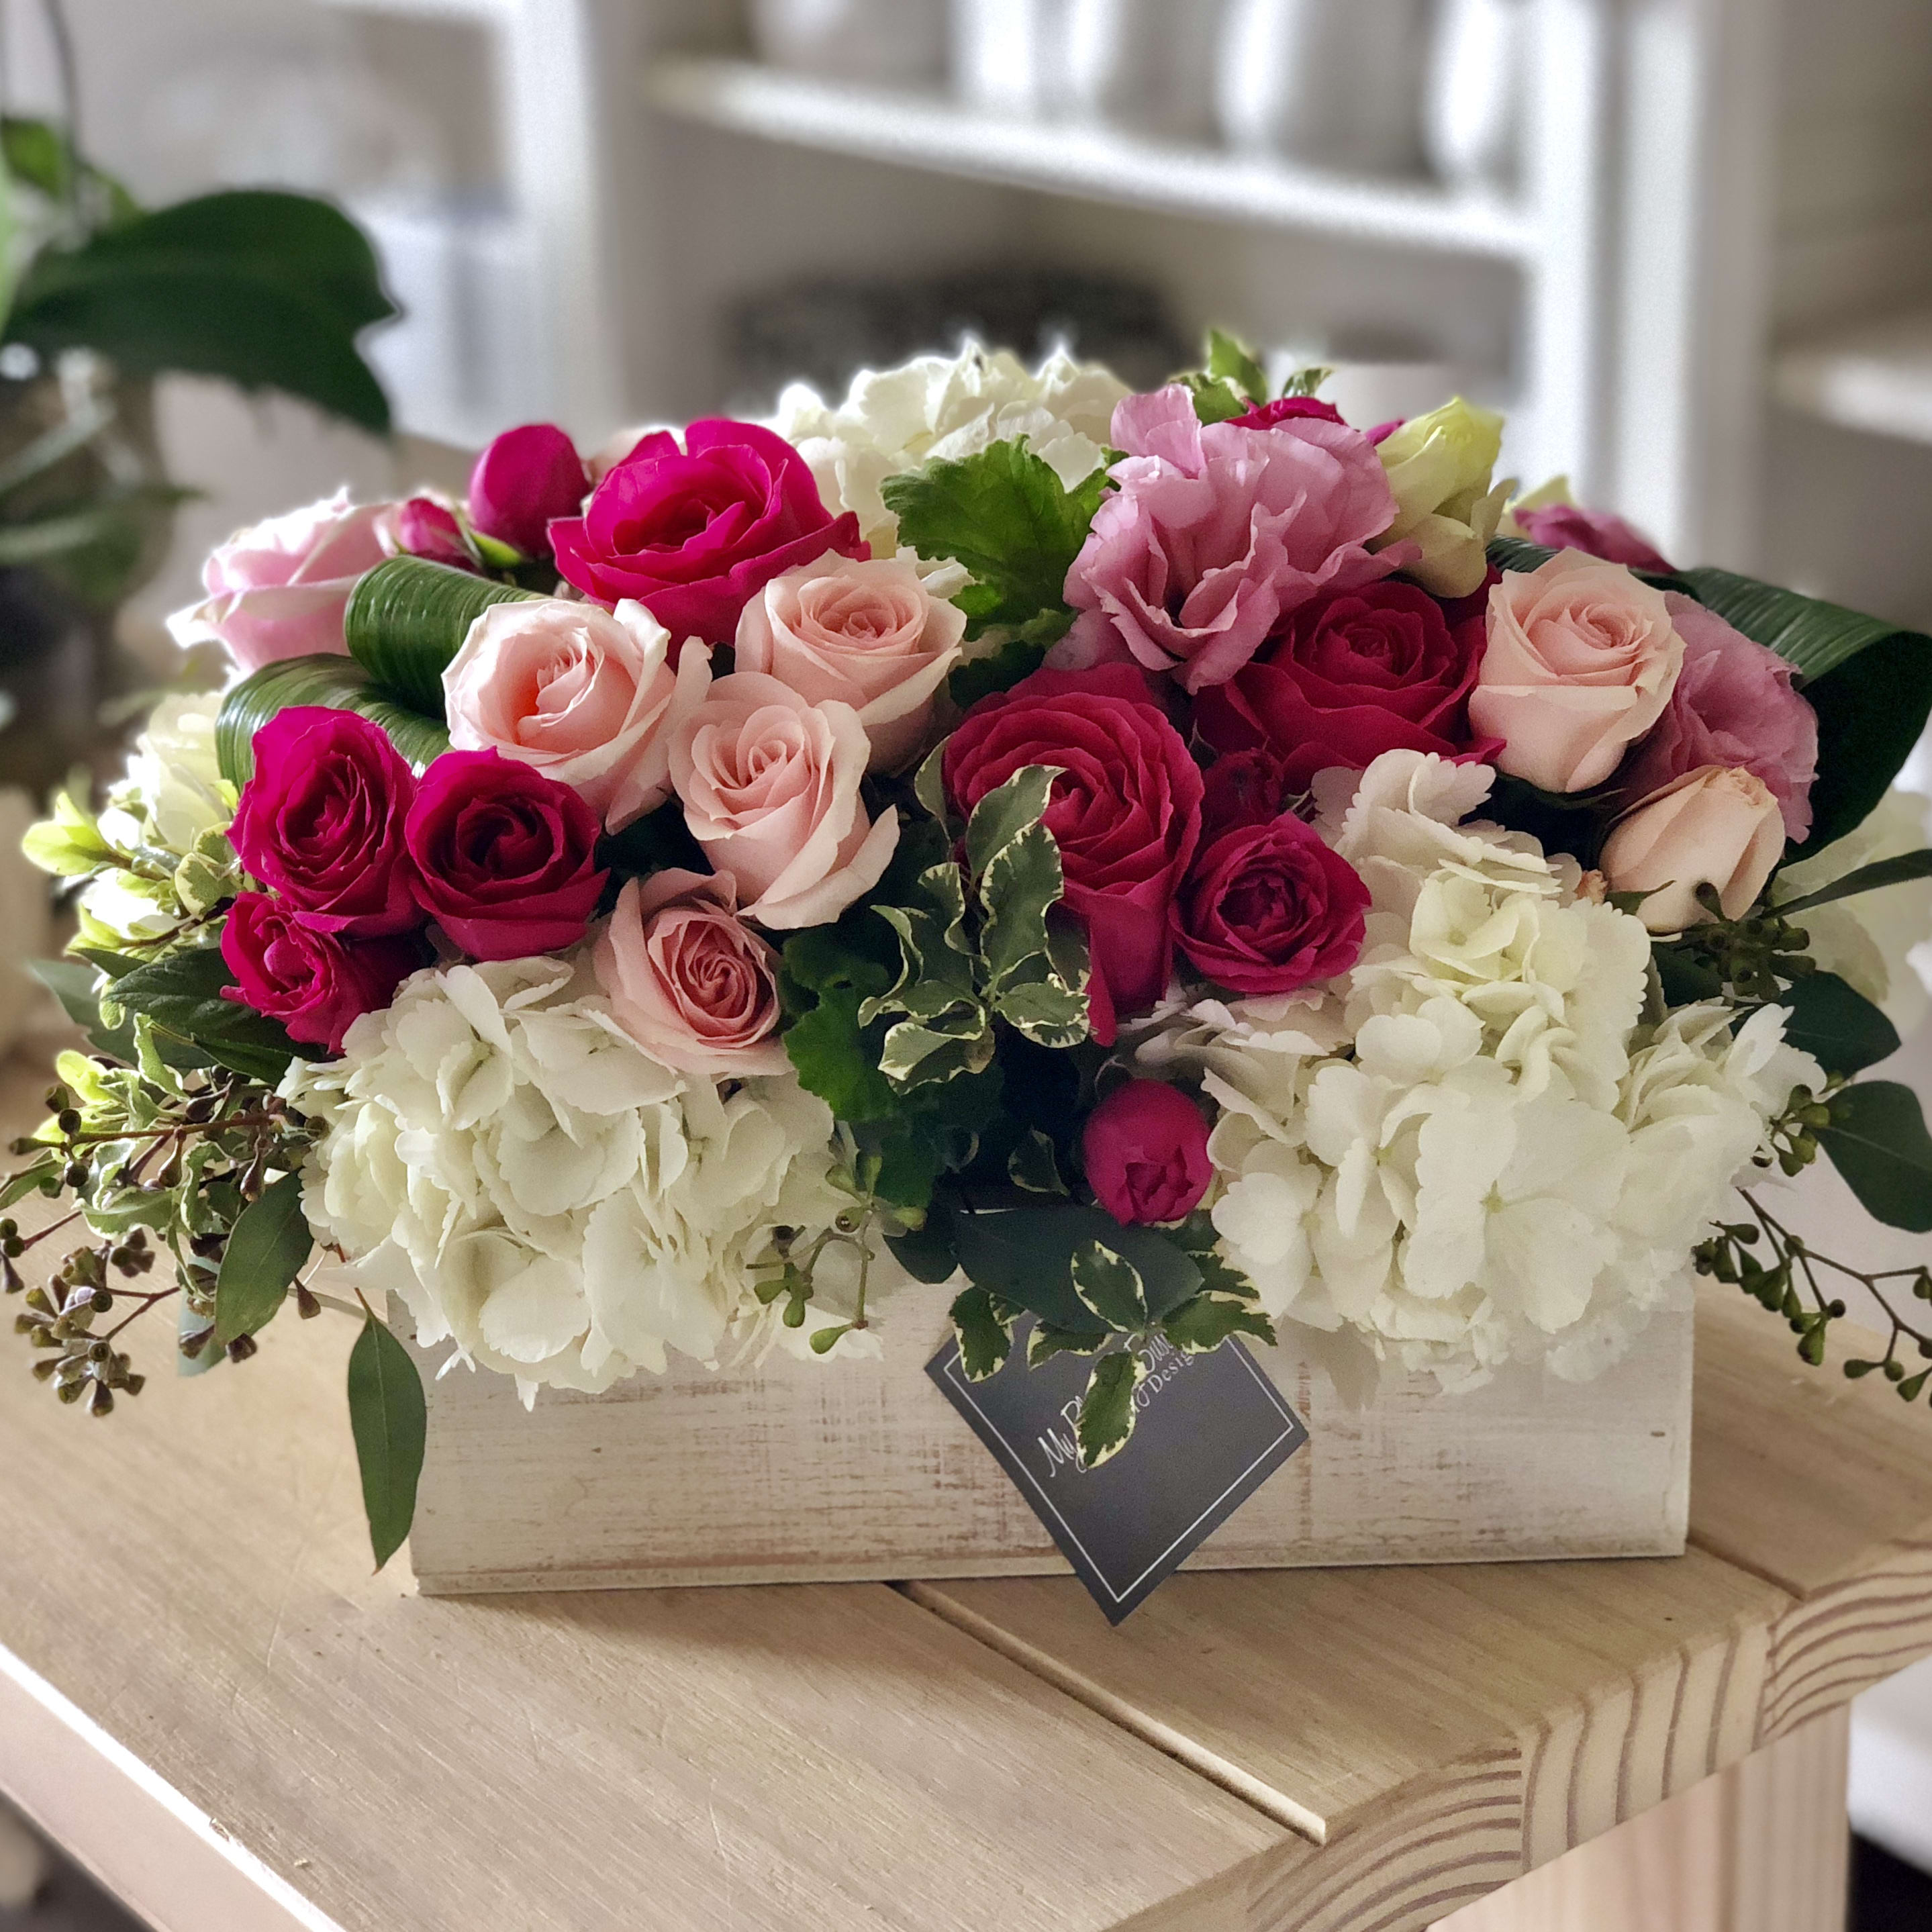 Expressions of Pink - Expressions of Pink brings bright color and beauty to any home or office. Our rustic wooden box is artfully arranged with a selection of vibrant pink florals, including stunning white hydrangeas and beautiful pink roses. Sure to make a lasting impression, this arrangement makes the perfect addition for special occasions or just because! Not only will Expressions of Pink generate smiles, but the natural scents from the flowers will be sure to relax and bring happiness into the atmosphere. Make your next sentiment even more special when you express it with Expressions of Pink!